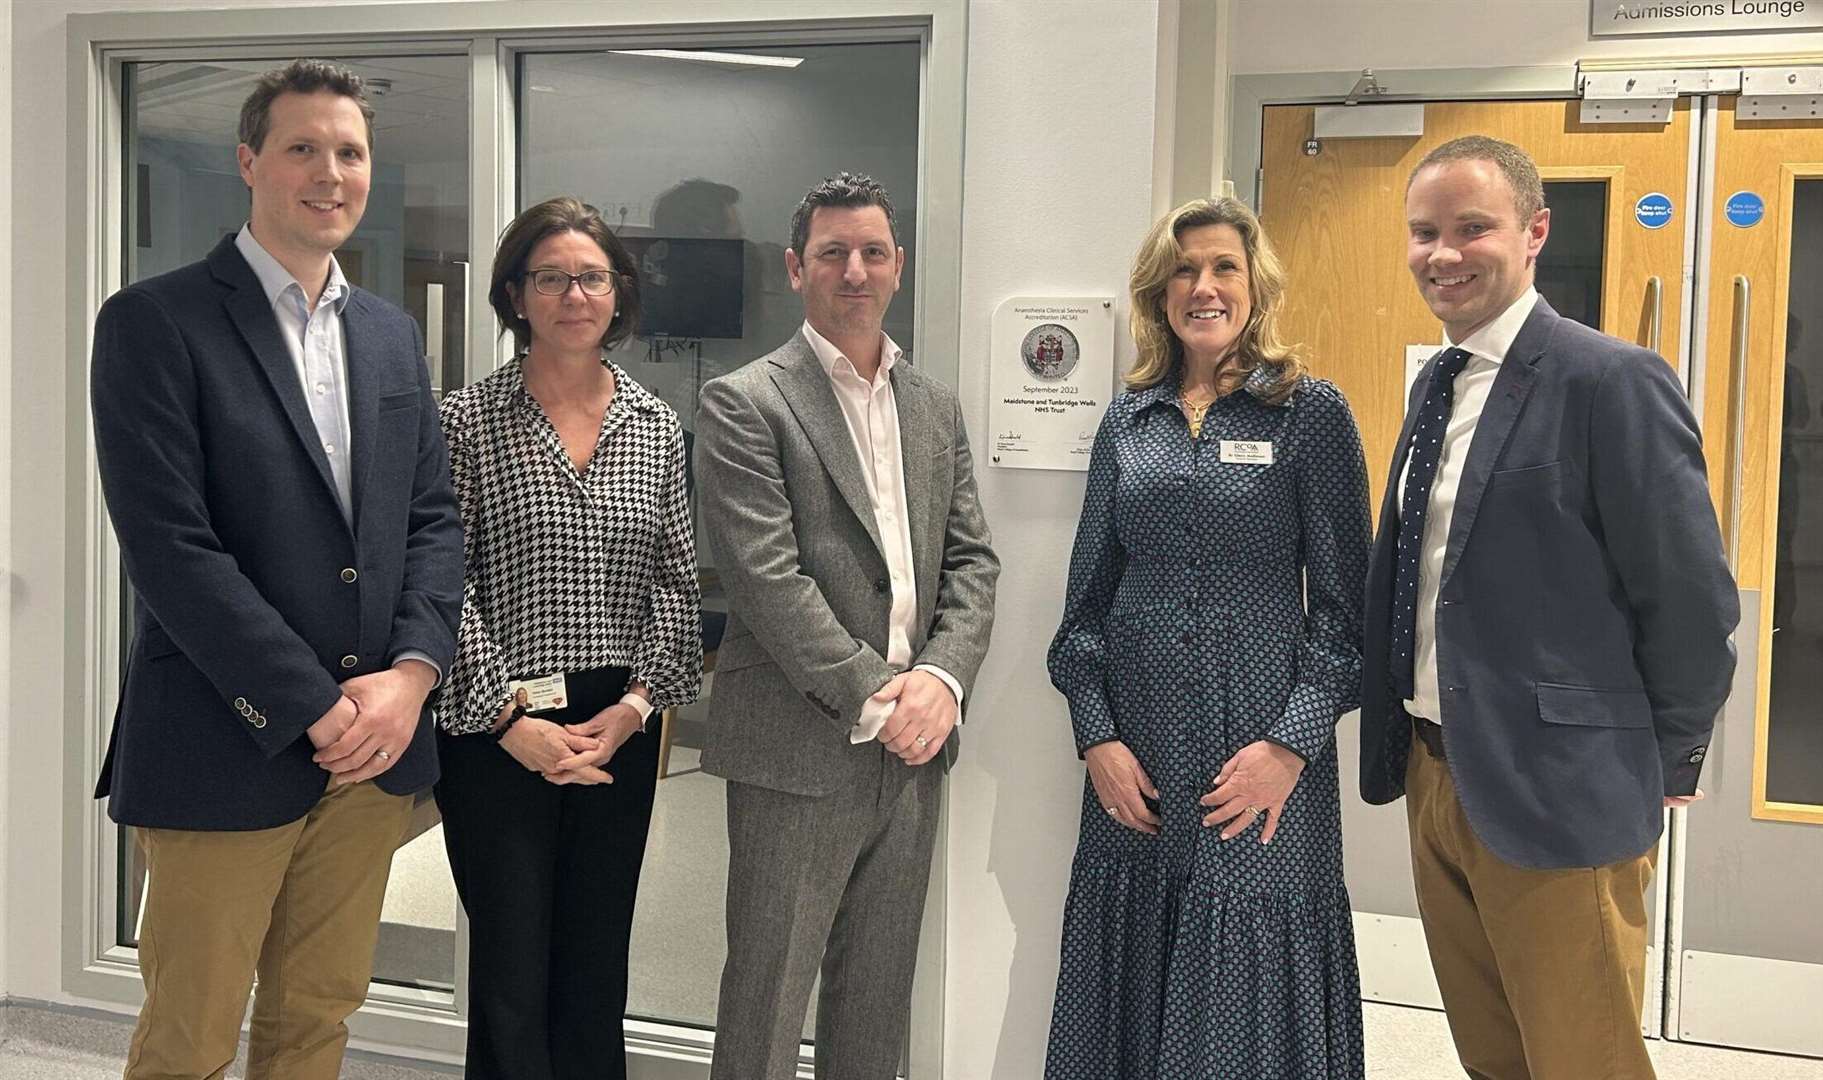 From left to right: Dr Benjamin Rudge, Dr Helen Burdett, Dr Jim MacDonald, Dr Claire Mallinson and Dr James Peerless at Tunbridge Wells Hospital